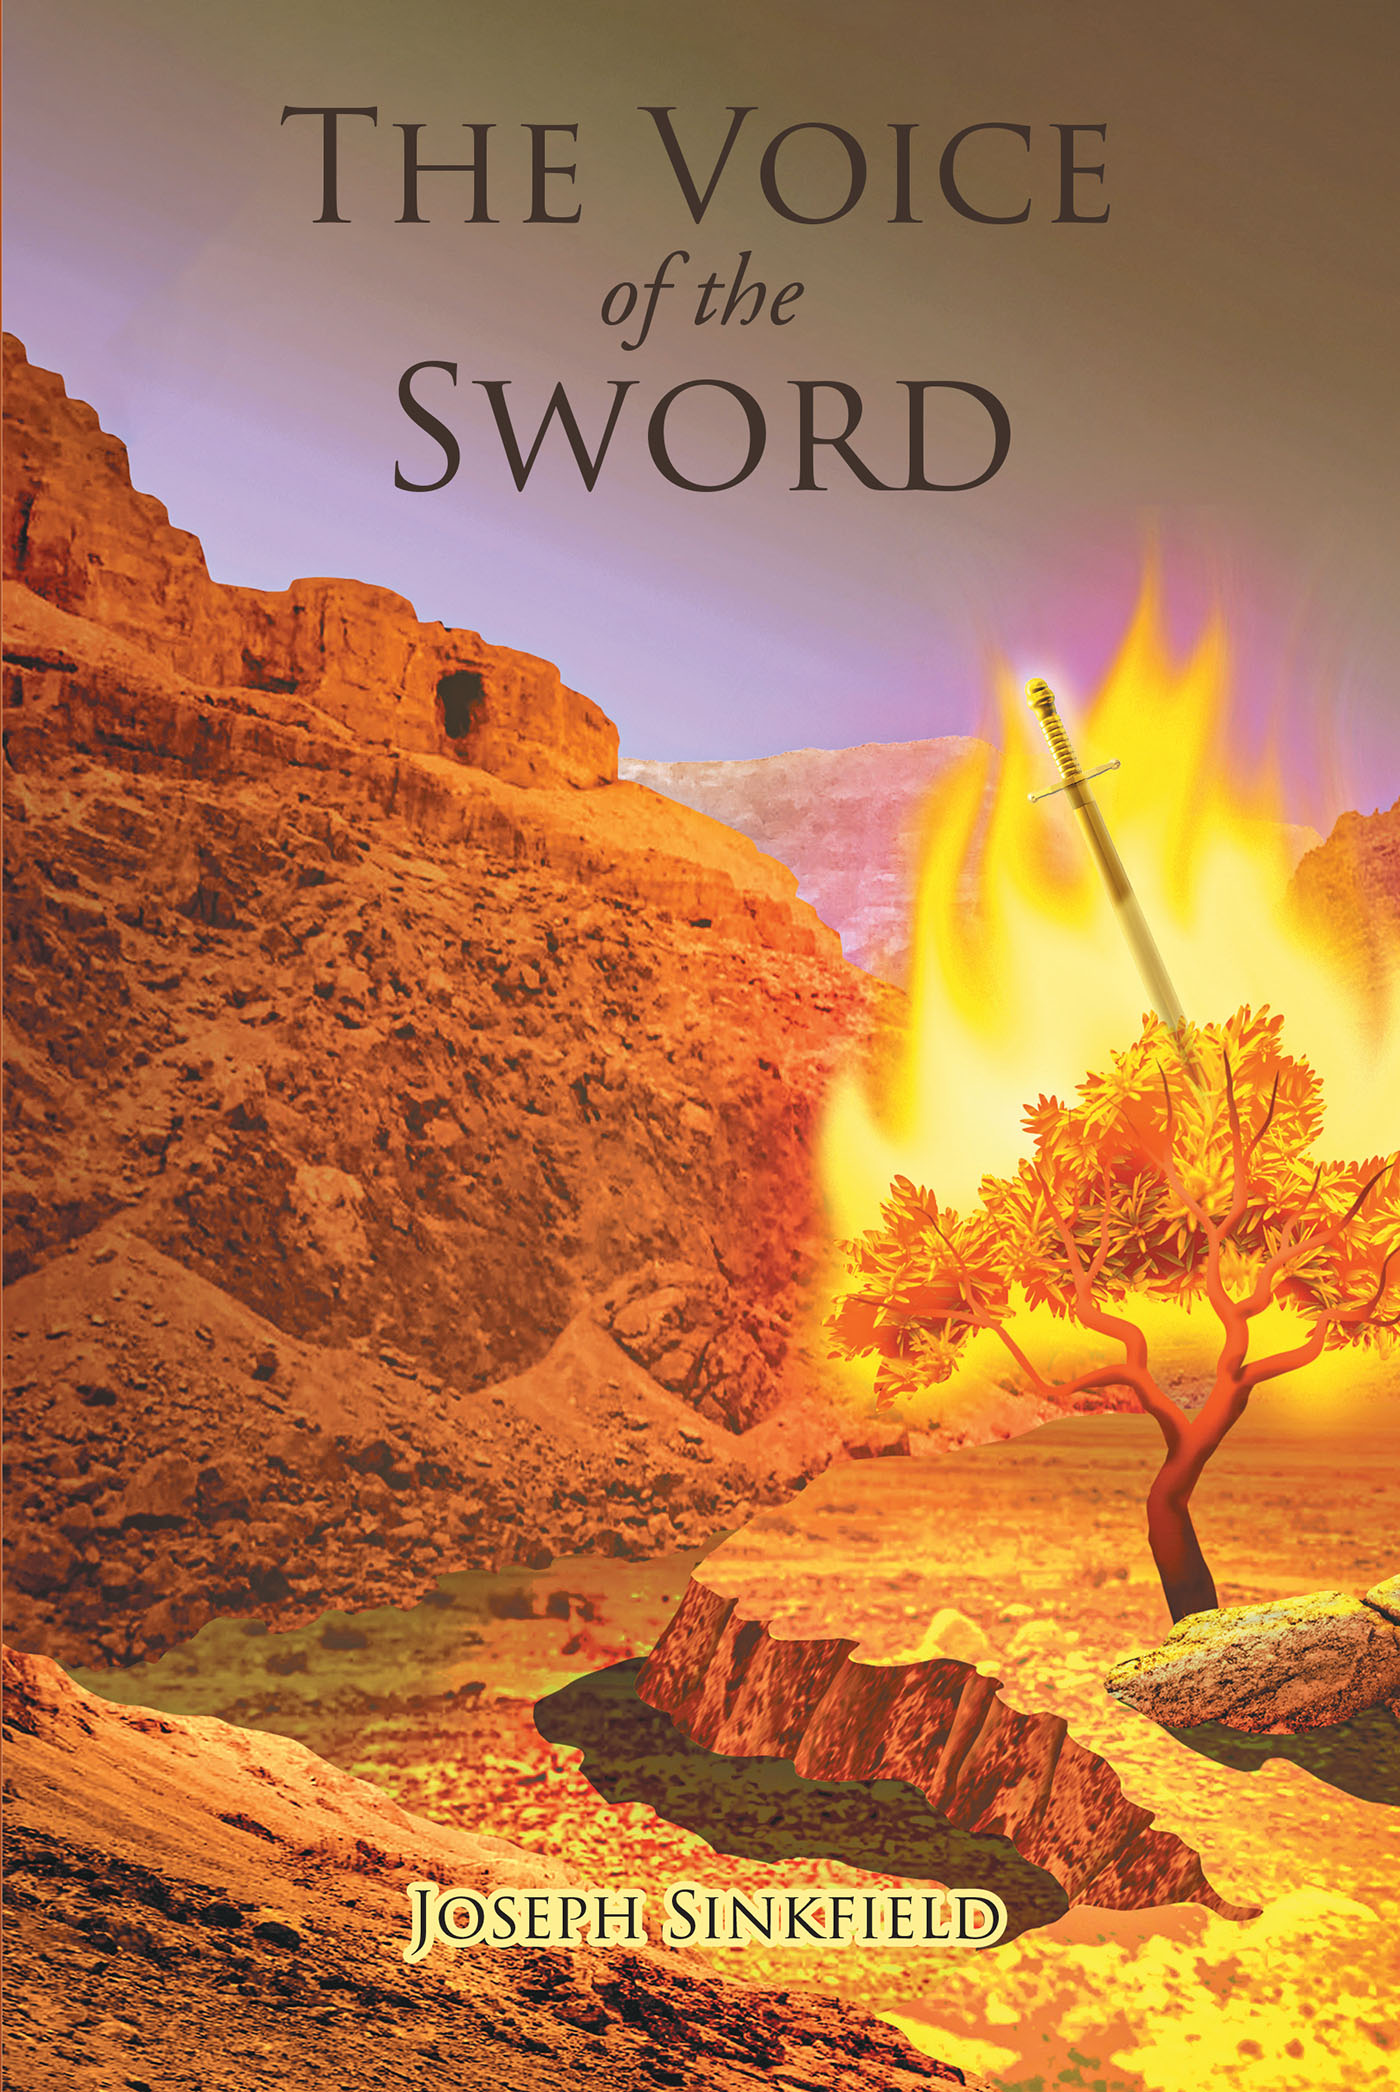 Author Joseph Sinkfield’s New Book, "The Voice of the Sword," Offers All Readers an In-Depth, Enlightening Discussion of the True Meaning of the Word of God